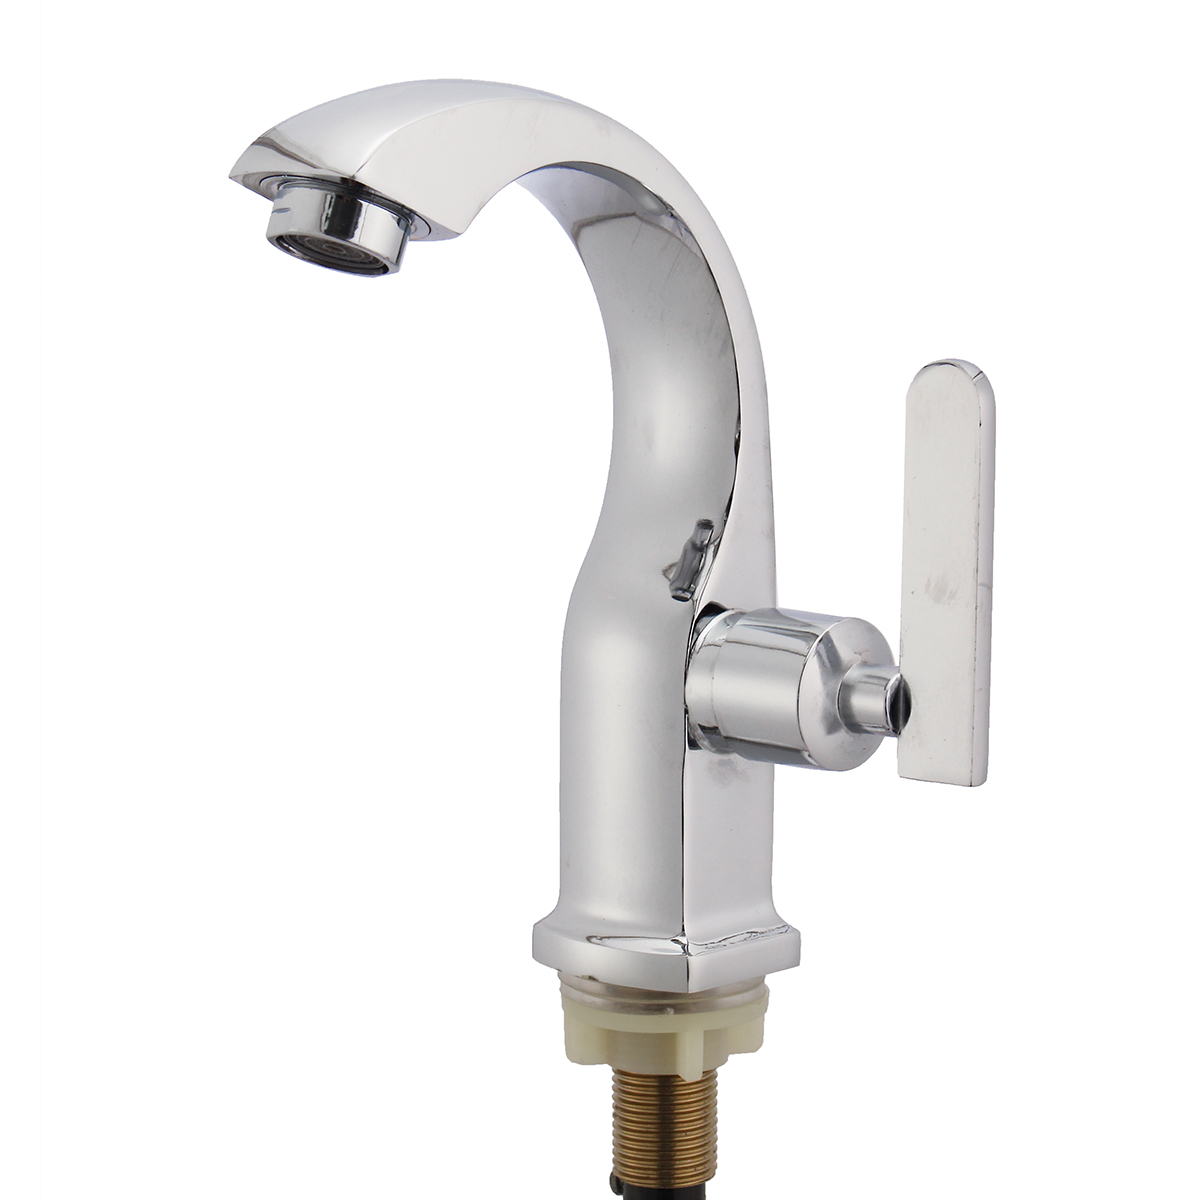 Chrome-Finish-Single-Lever-Home-Bathroom-Basin-Faucet-Spout-Sink-Cold-Water-Tap-1298560